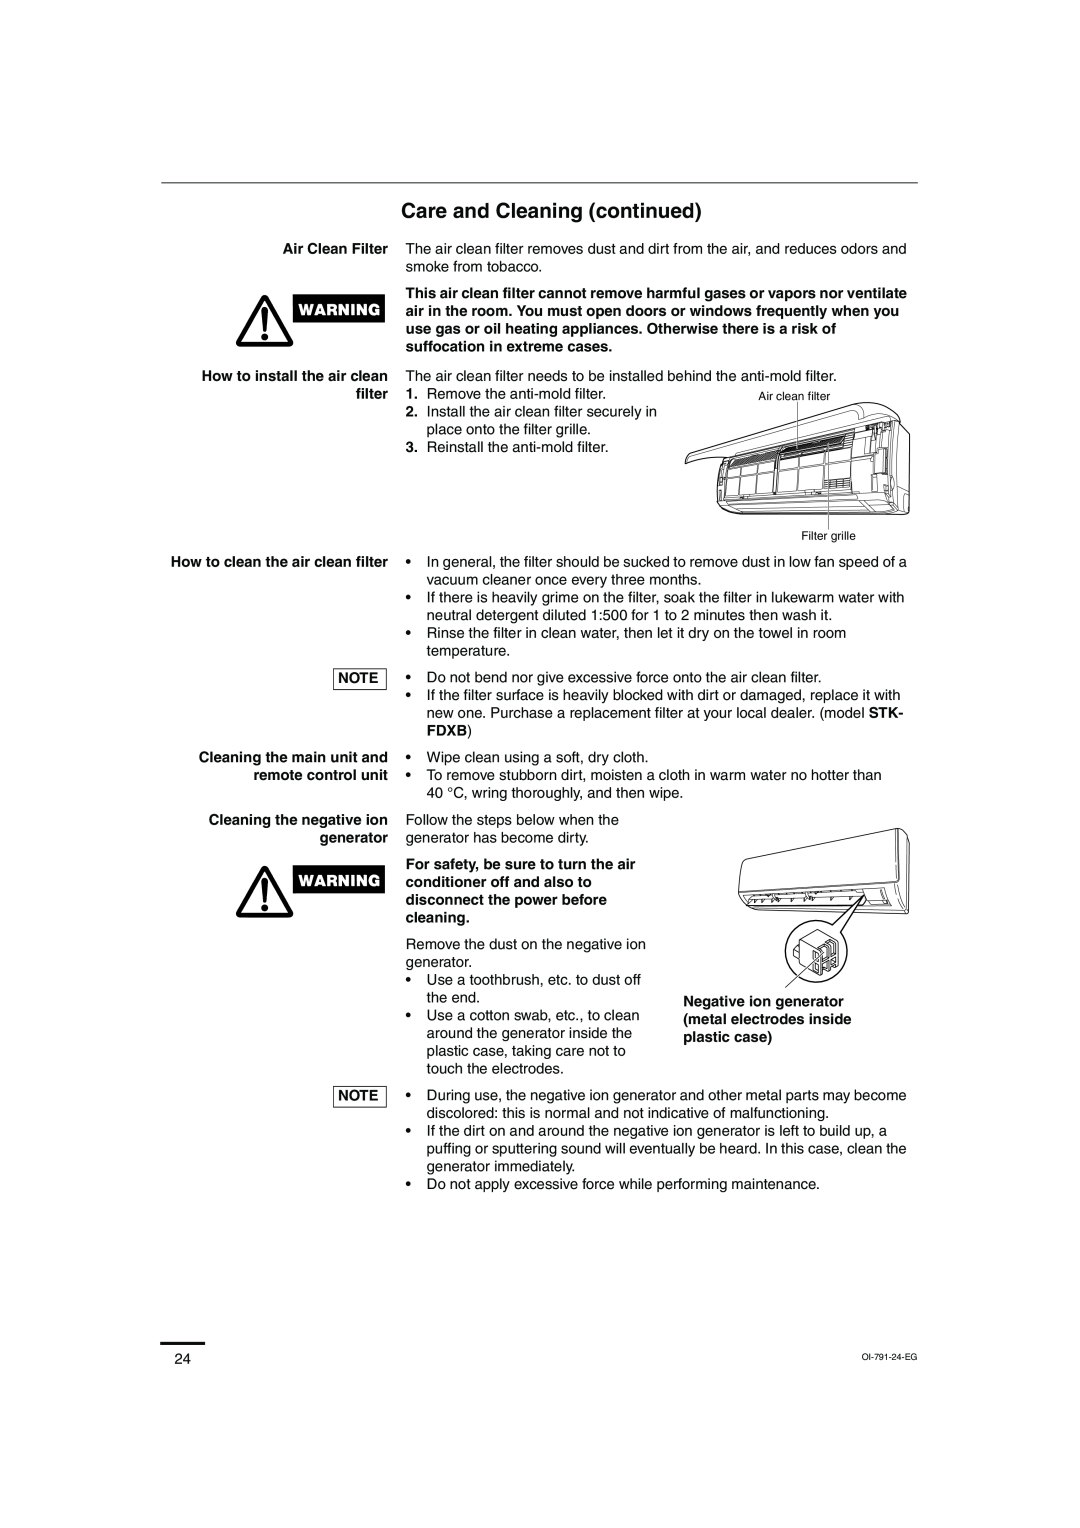 Sanyo SAP-KRV94EHDX service manual Care and Cleaning continued, How to clean the air clean filter 